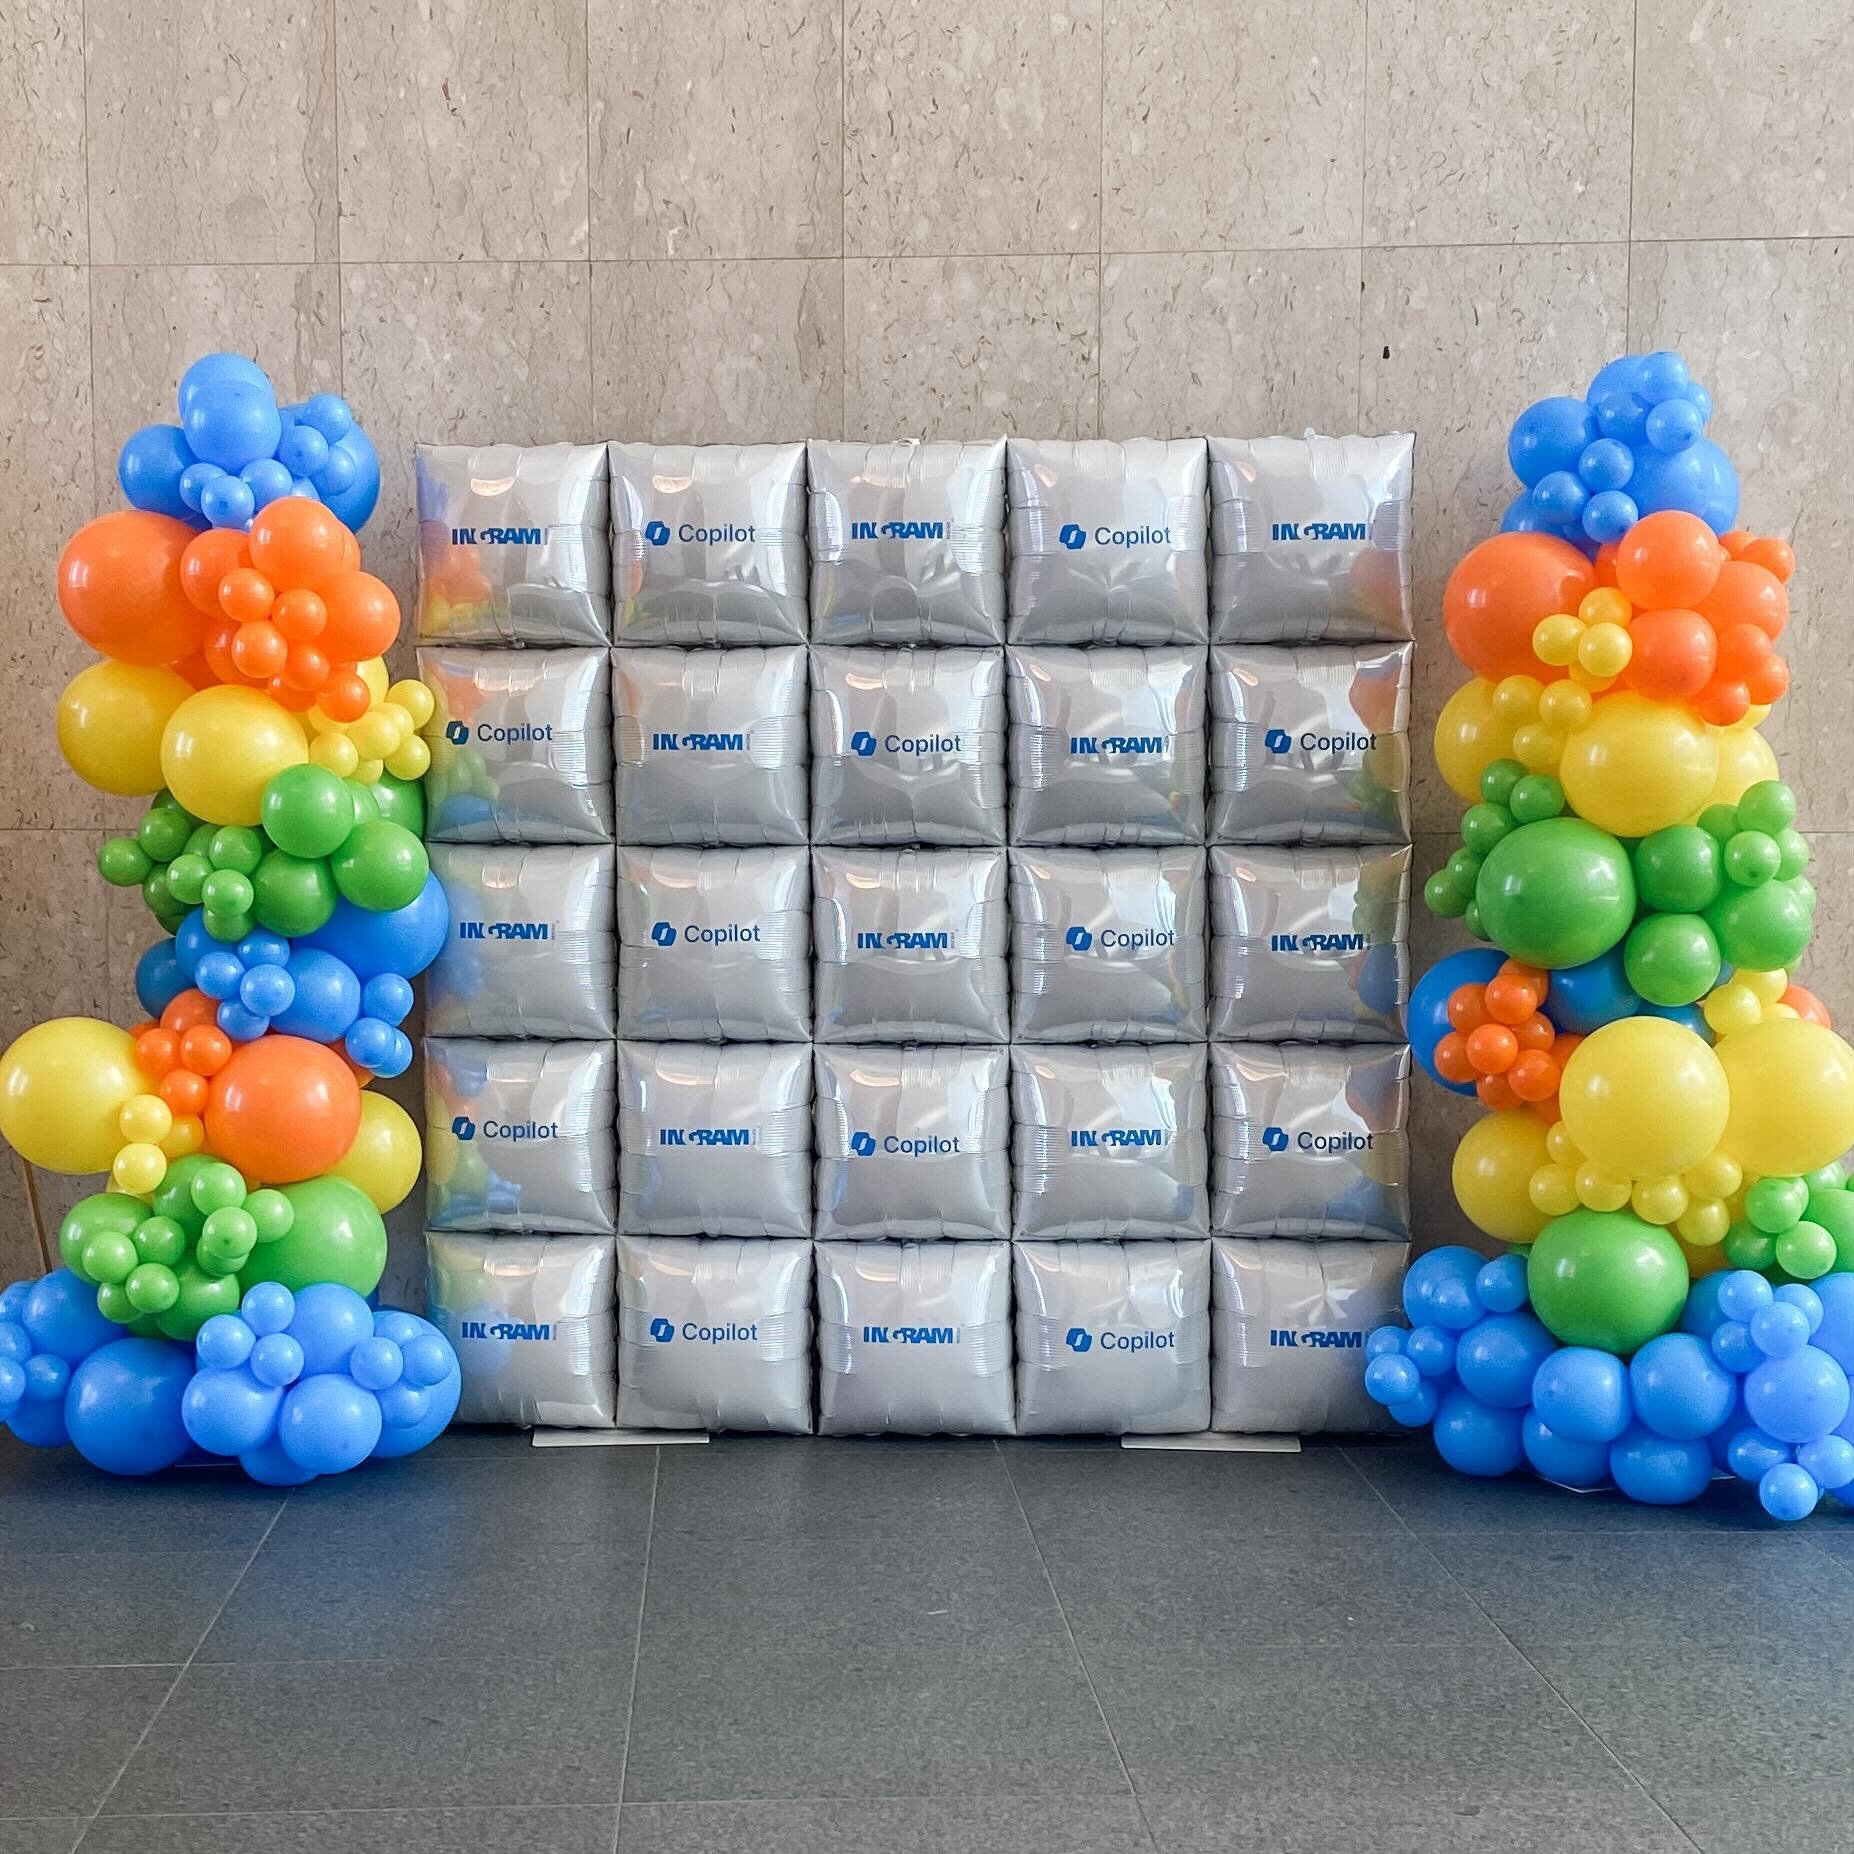 Introducing the squared balloon wall invented by the fabulous @confetticastle and @tuftexballoons. It is the perfect backdrop for grand openings, product launches and parties! Walls can be checkered or solid and come in white, silver, gold, black, ho